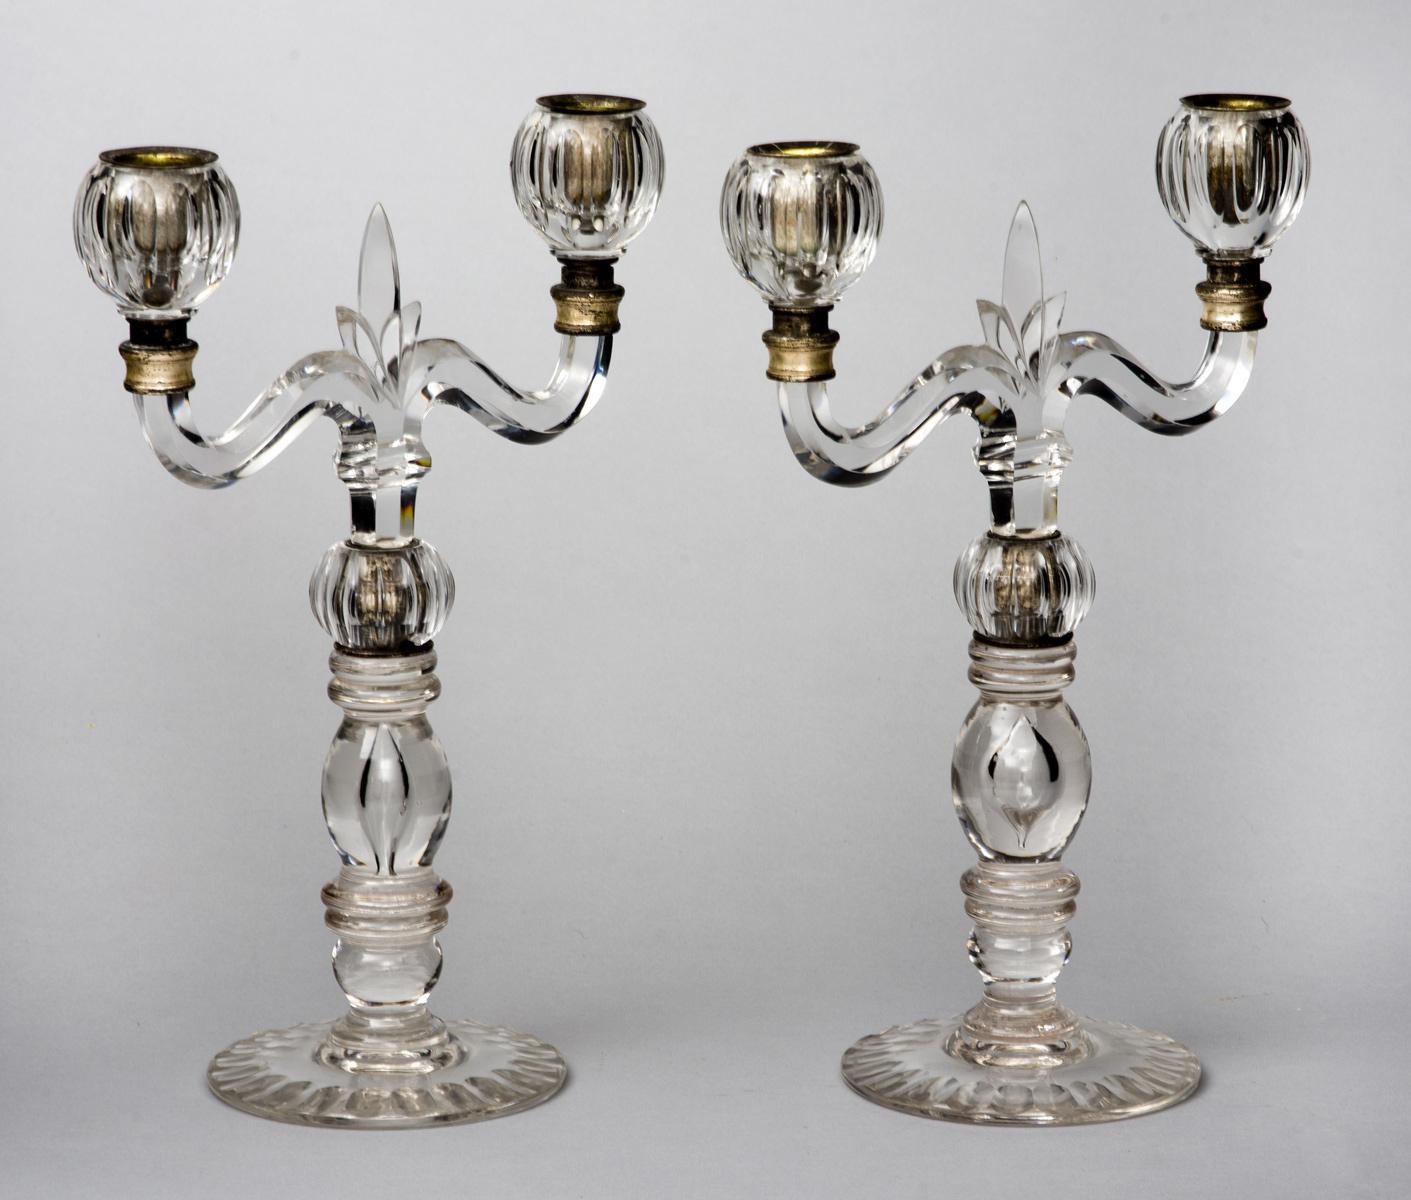 Pair of Baccarat-style molded glass two-arm candelabra with a fleur-de-lis between the arms, fluted nozzles, turned upright column on fluted base.